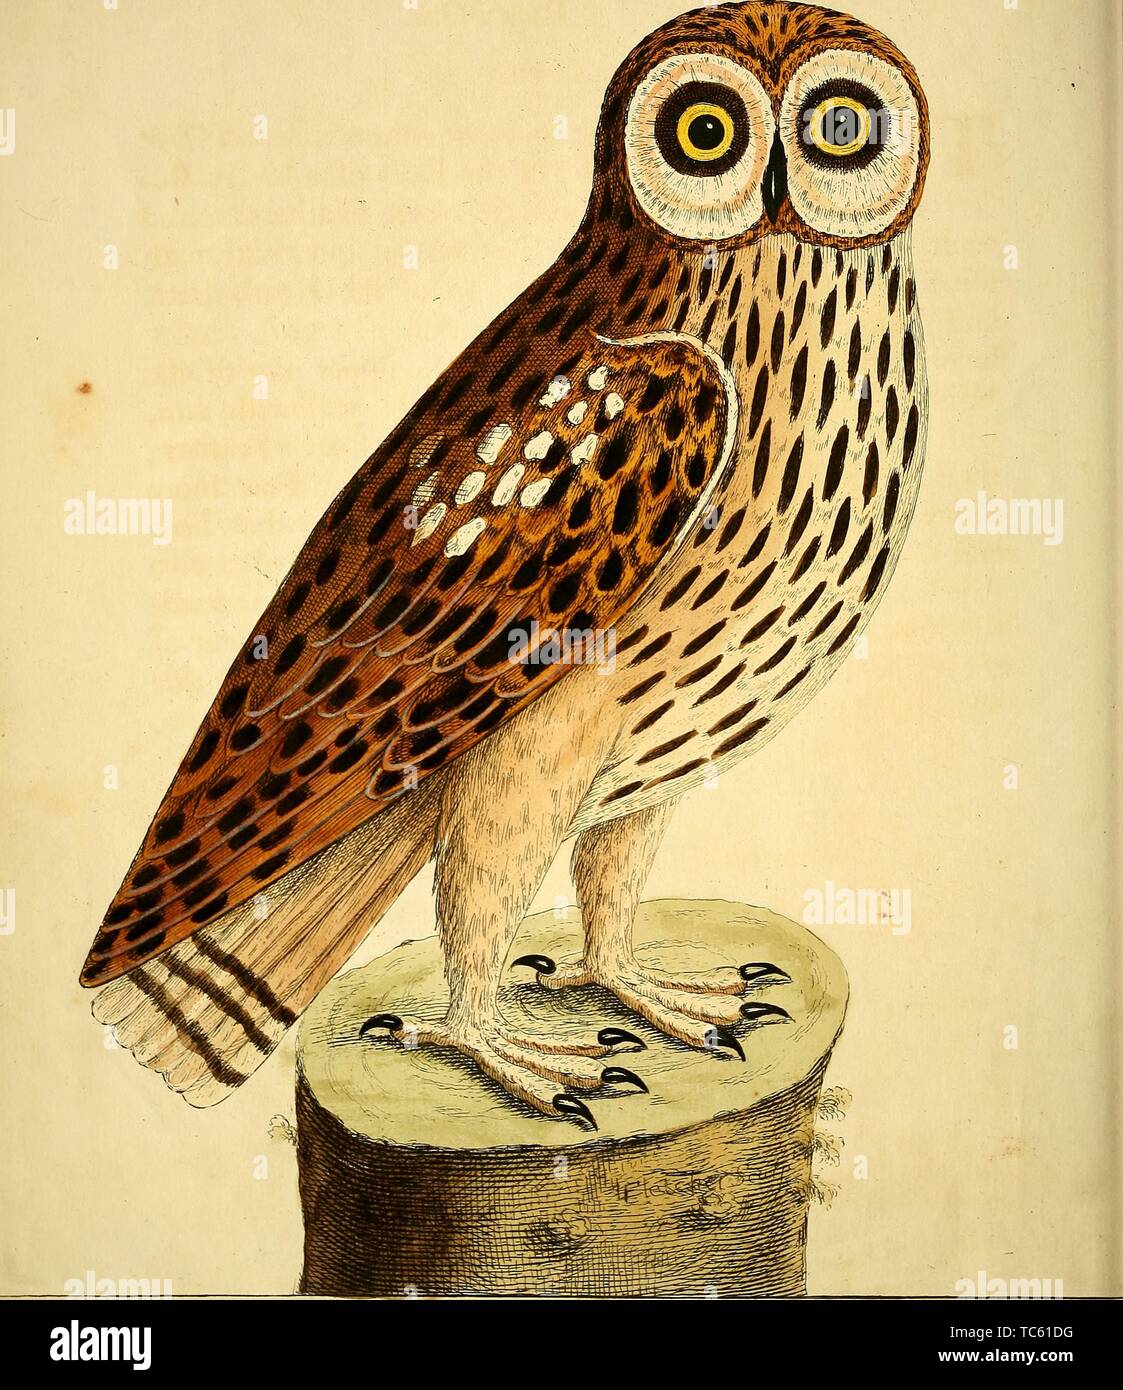 Engraving of the Great Brown Owl, from the book 'A natural history of birds' by Eleazar Albin, William Derham, and Jonathan Dwight, 1731. Courtesy Internet Archive. () Stock Photo